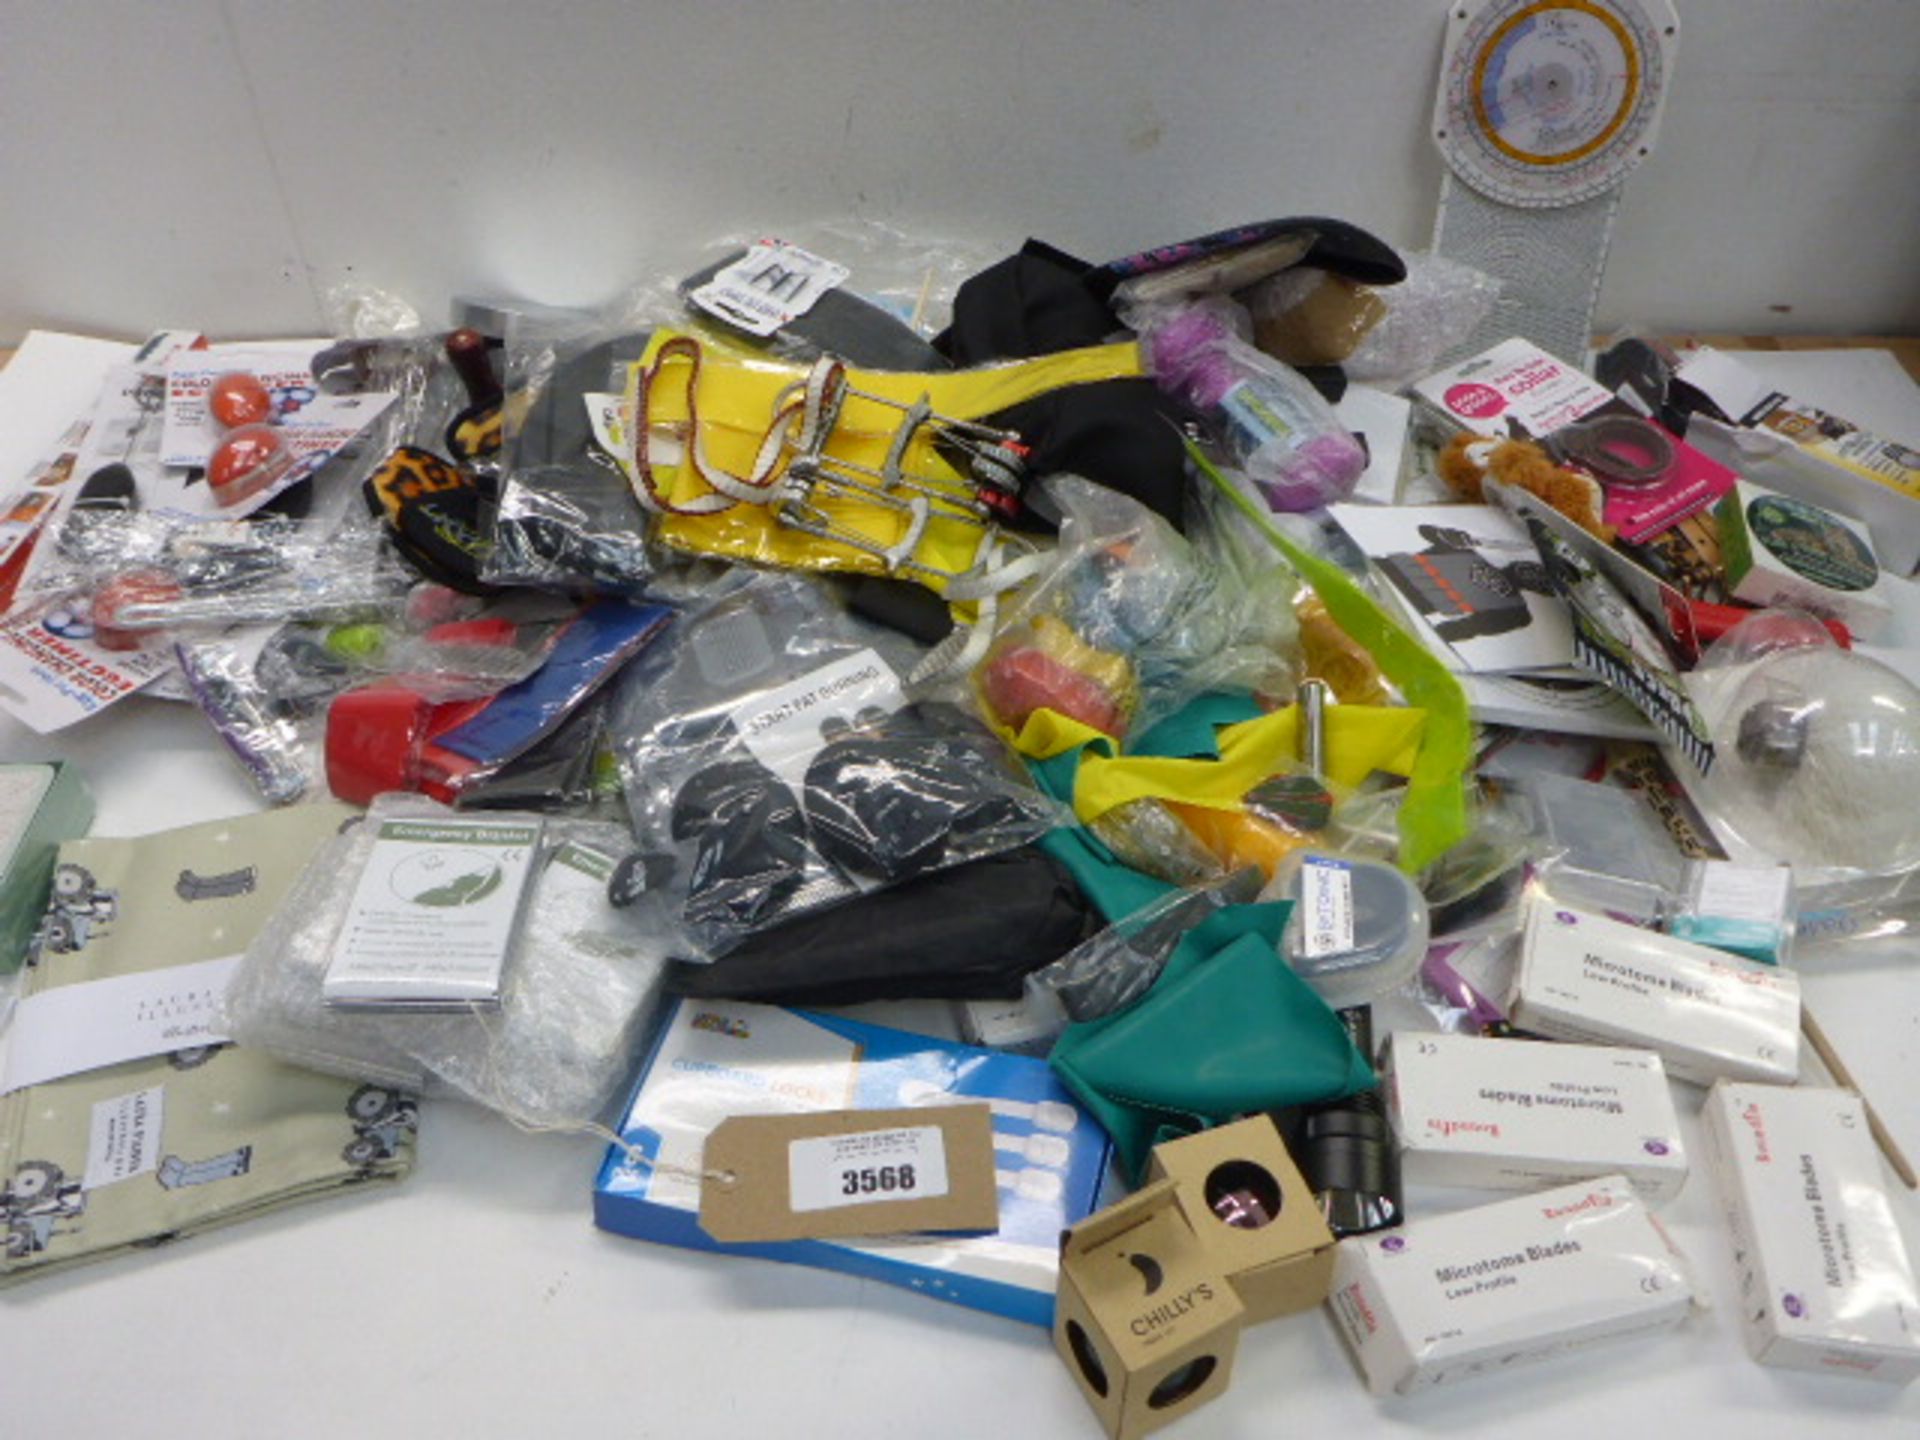 Large bag of household sundries, emergency blankets, microtome blades, Chilly bottle tops, Pooley'